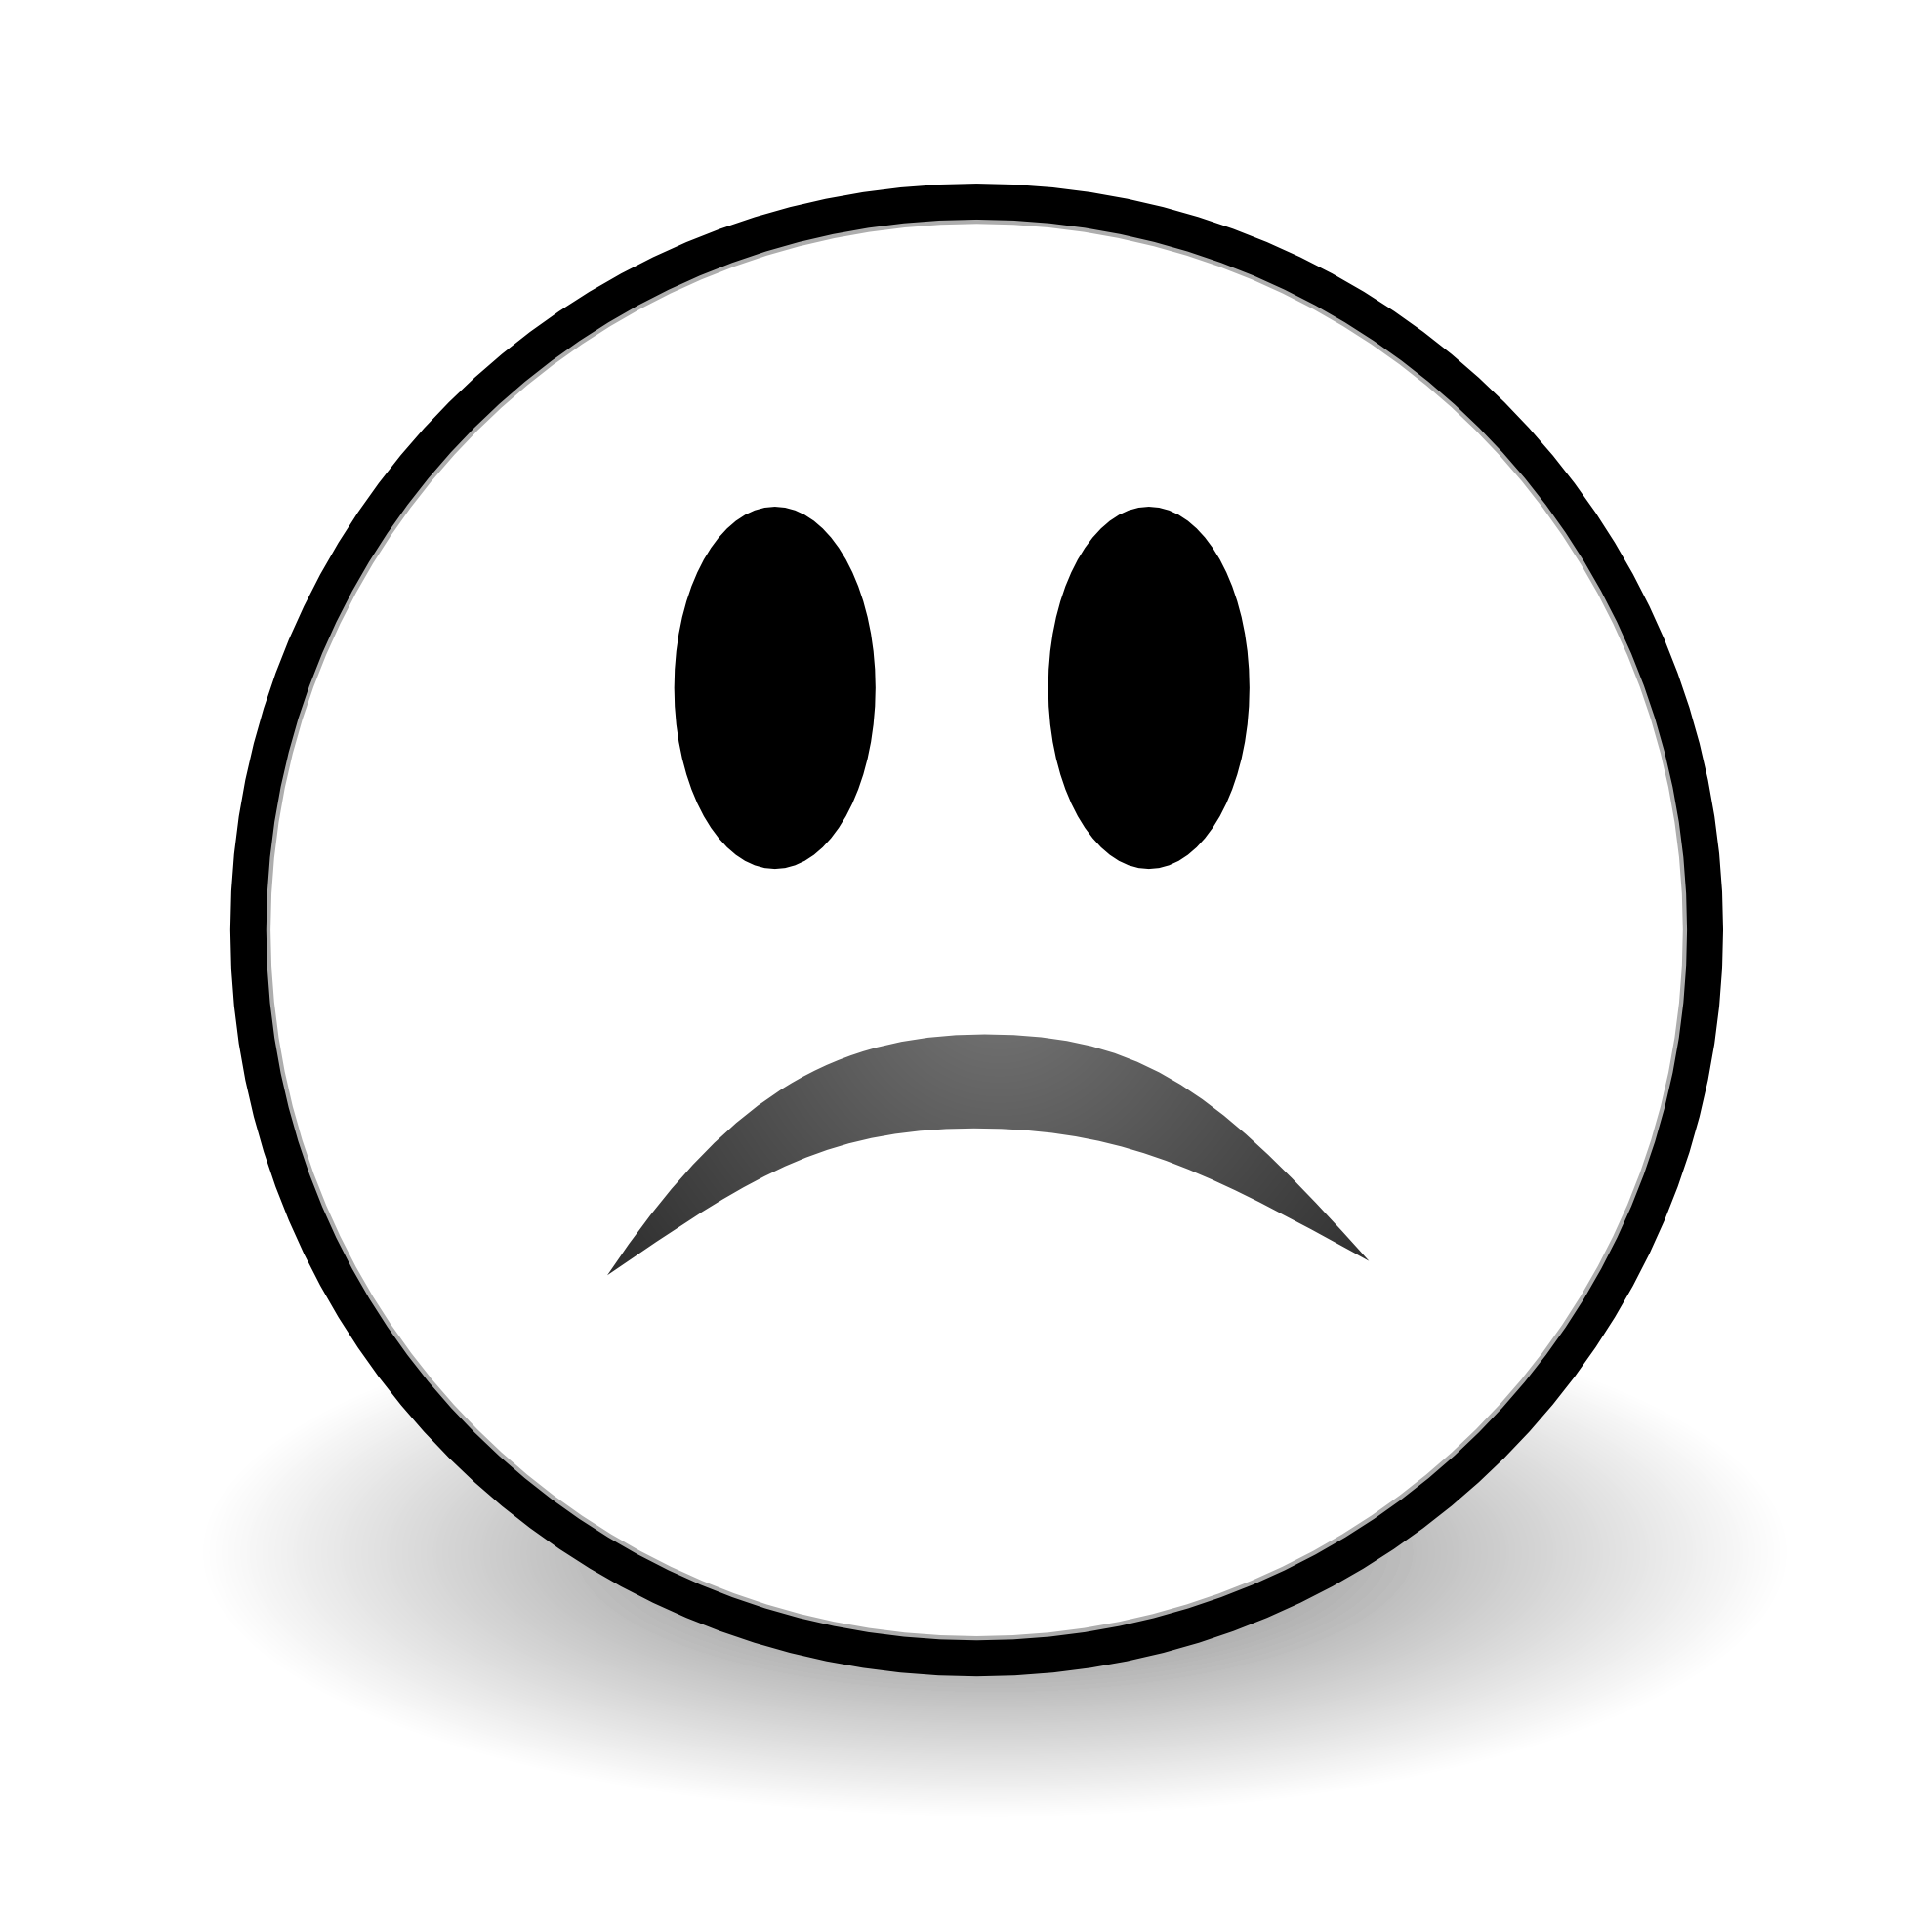 smiley face Sad Face Image | Clipart Panda - Free Clipart Images